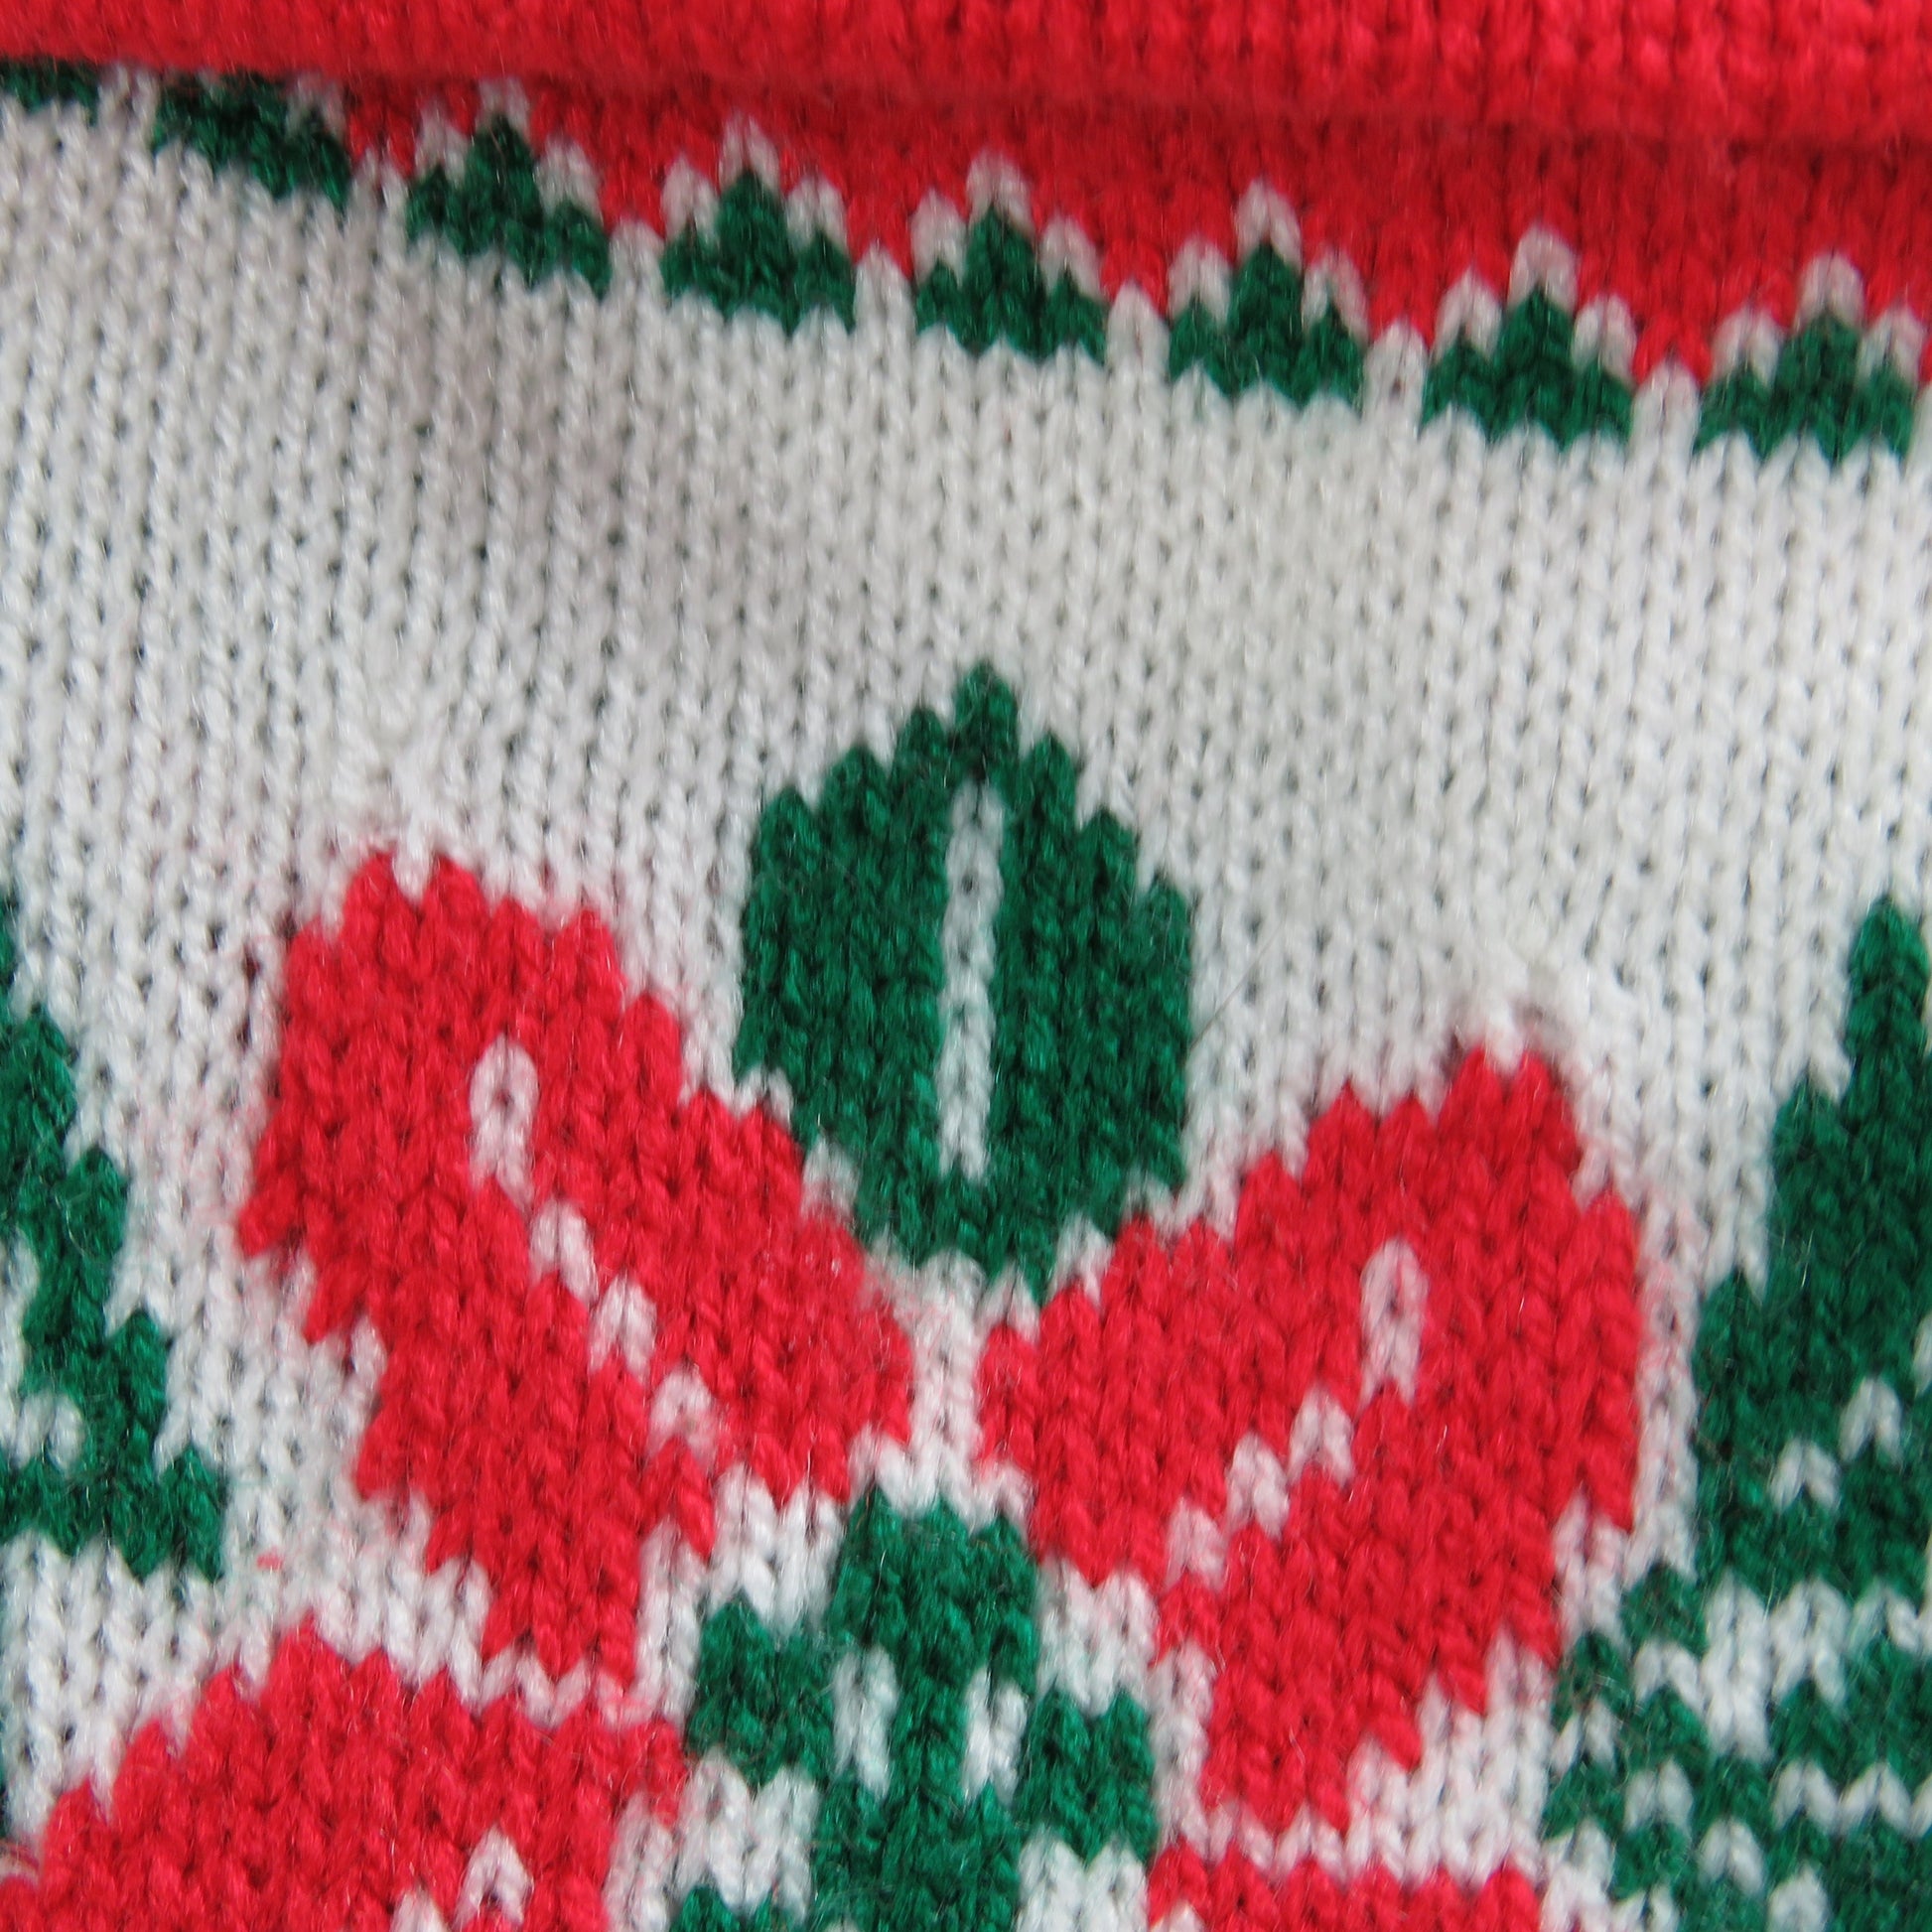 Vintage Knit Christmas Stocking Poinsettia Happy Holidays KNitted Red Green Sweater Print - At Grandma's Table